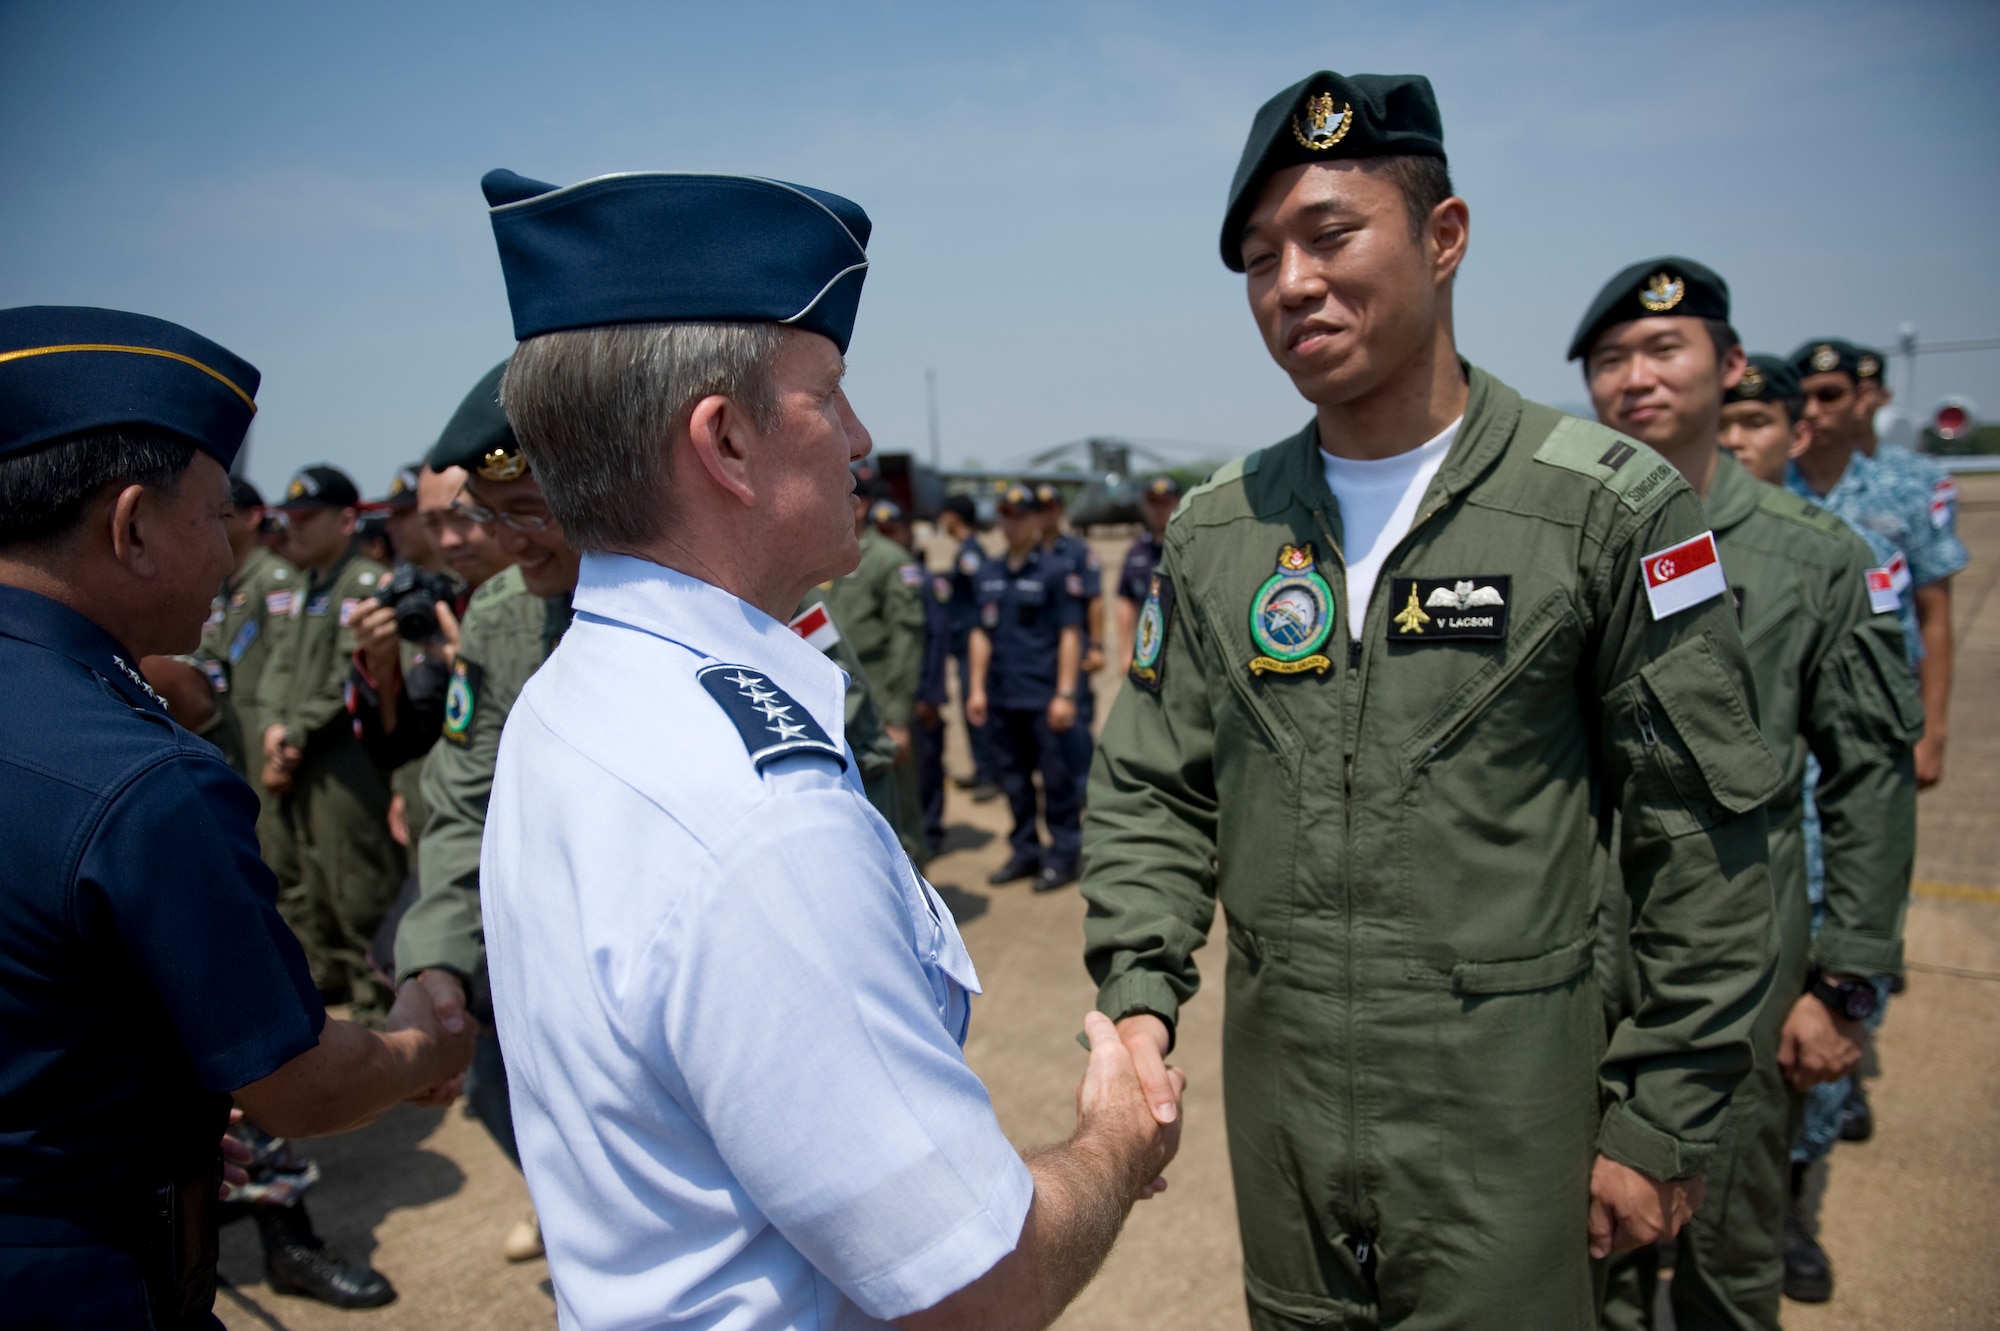 U.S. Air Force Gen. Hawk Carlisle, commander of Pacific Air Forces, thanks Airmen from the Republic of Singapore during the closing ceremony for Cope Tiger 13 at Korat Royal Thai Air Force Base, Thailand, March 22, 2013. More than 300 U.S. service members are participating in CT13, which offers an unparalleled opportunity to conduct a wide spectrum of large force employment air operations and strengthen military-to-military ties with two key partner nations, Thailand and Singapore. (U.S. Air Force photo/2nd Lt. Jake Bailey)